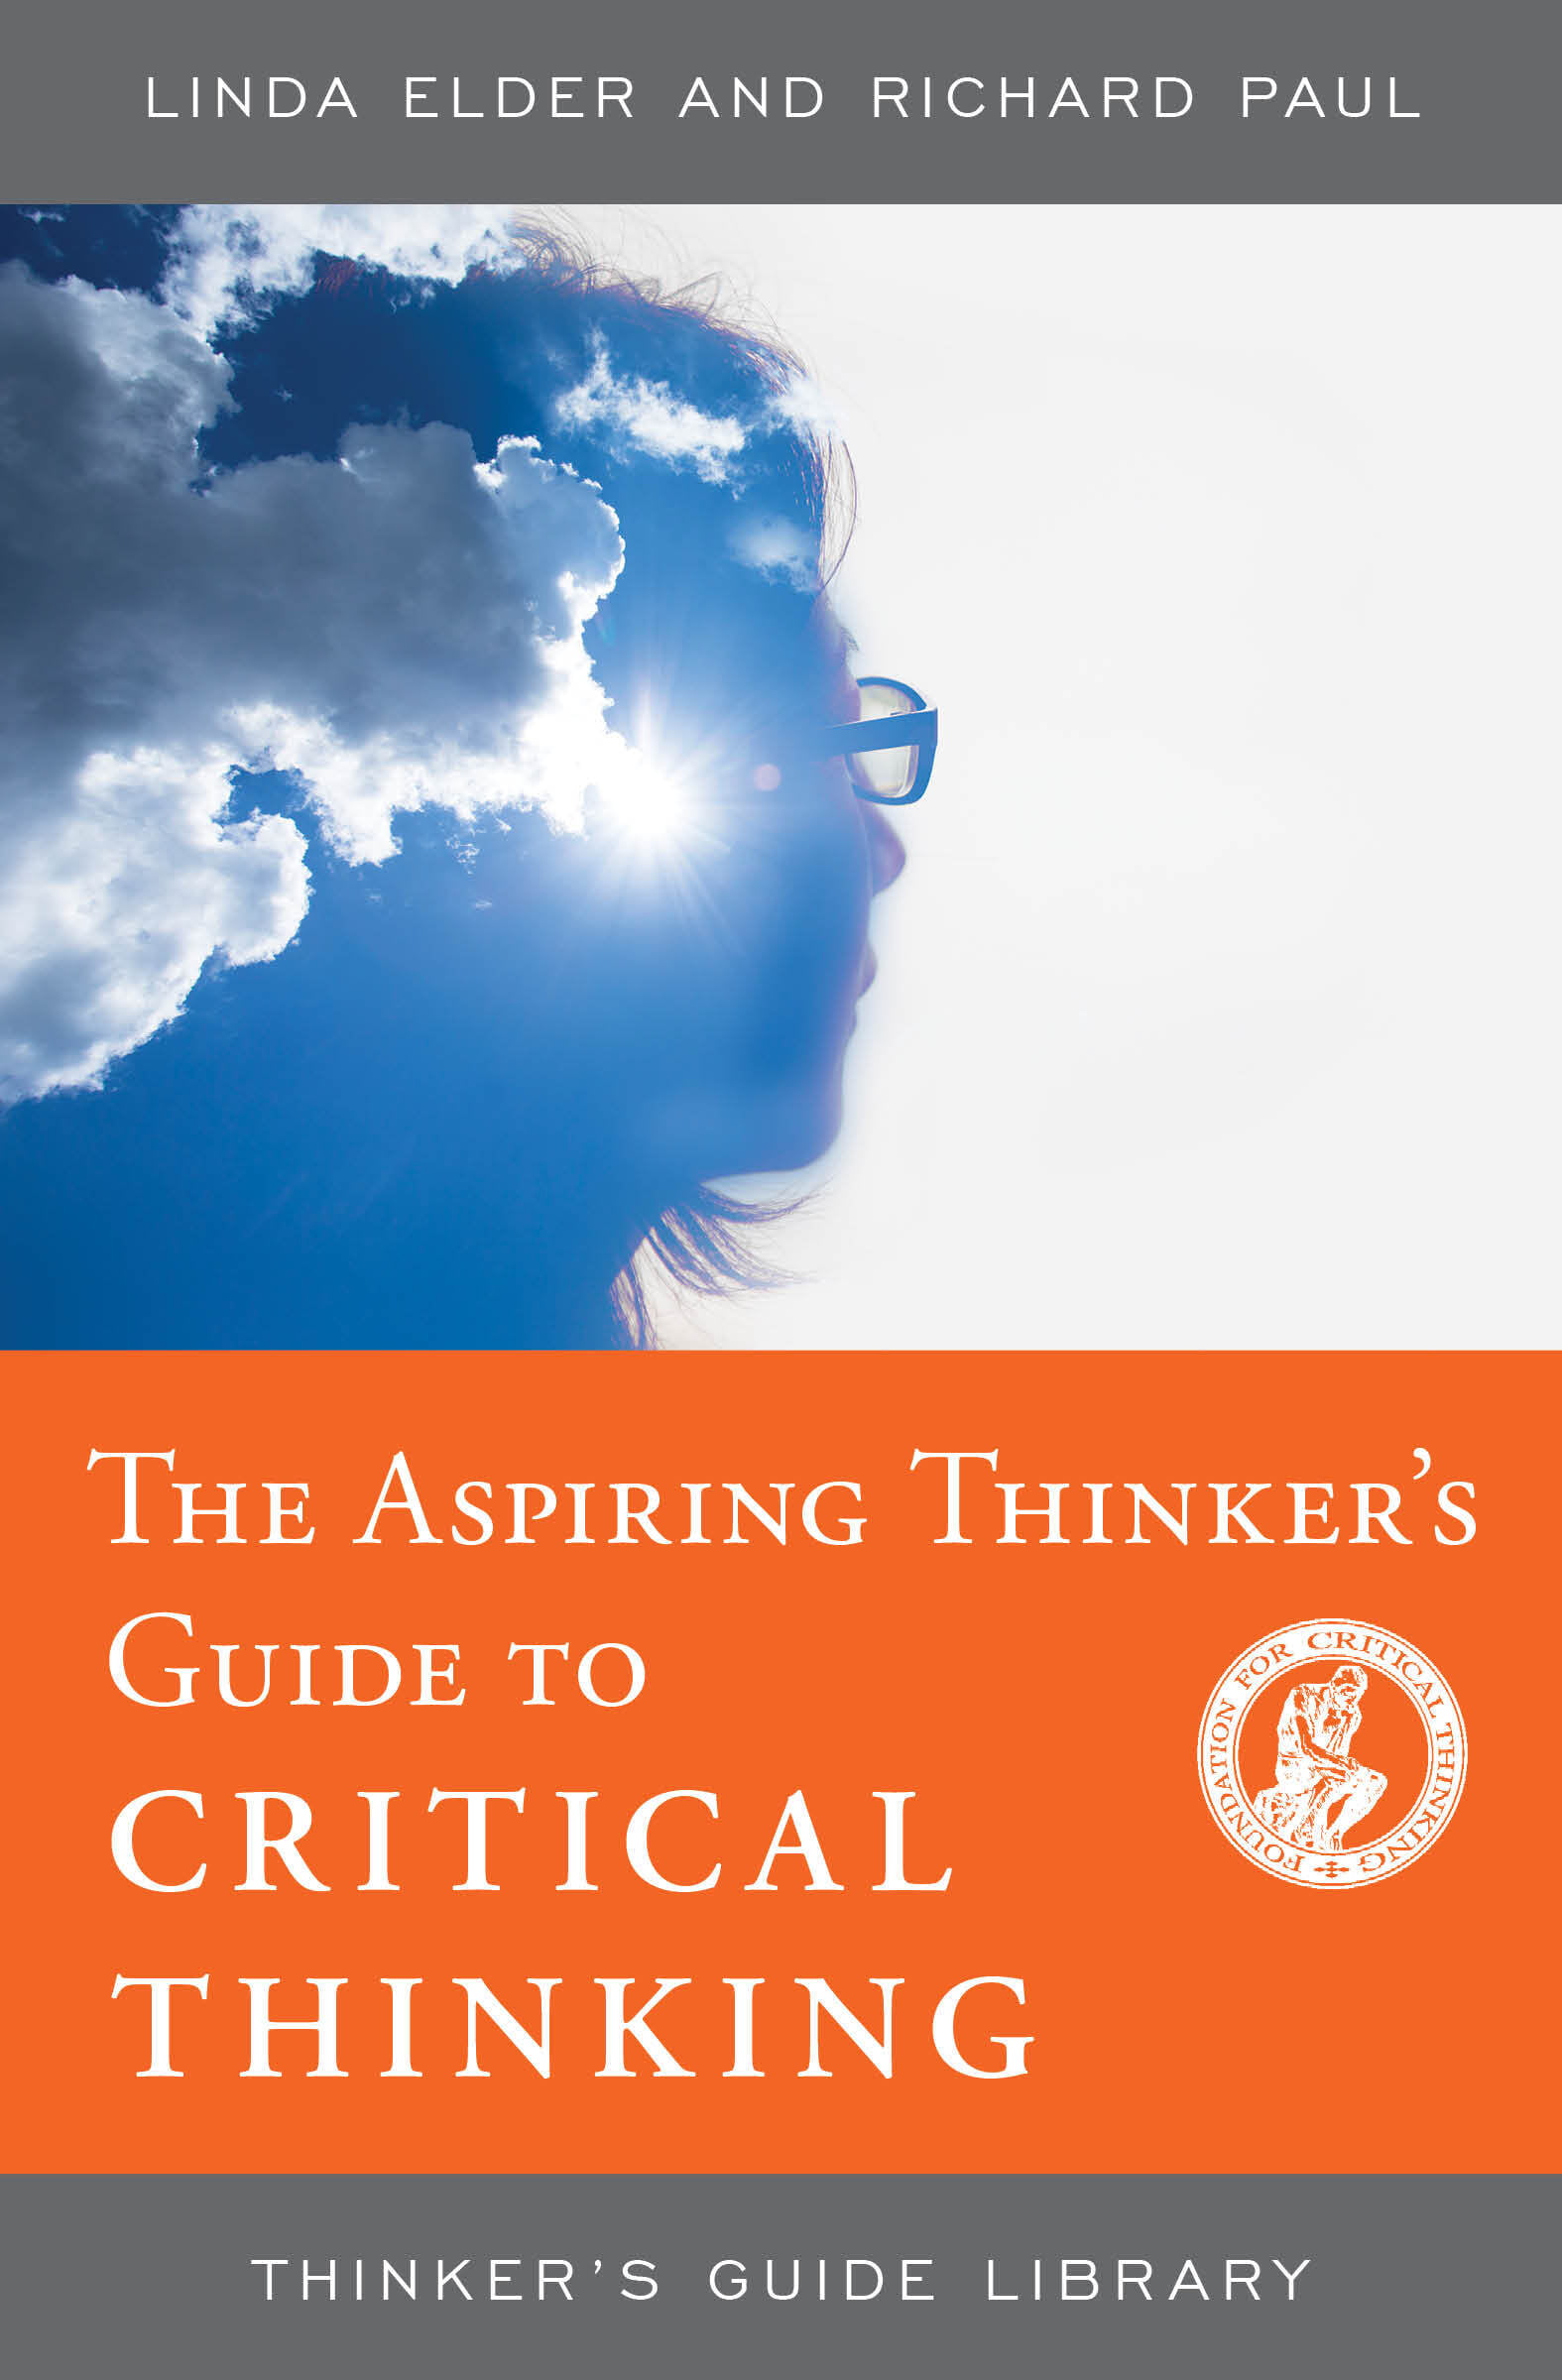 a level critical thinking book